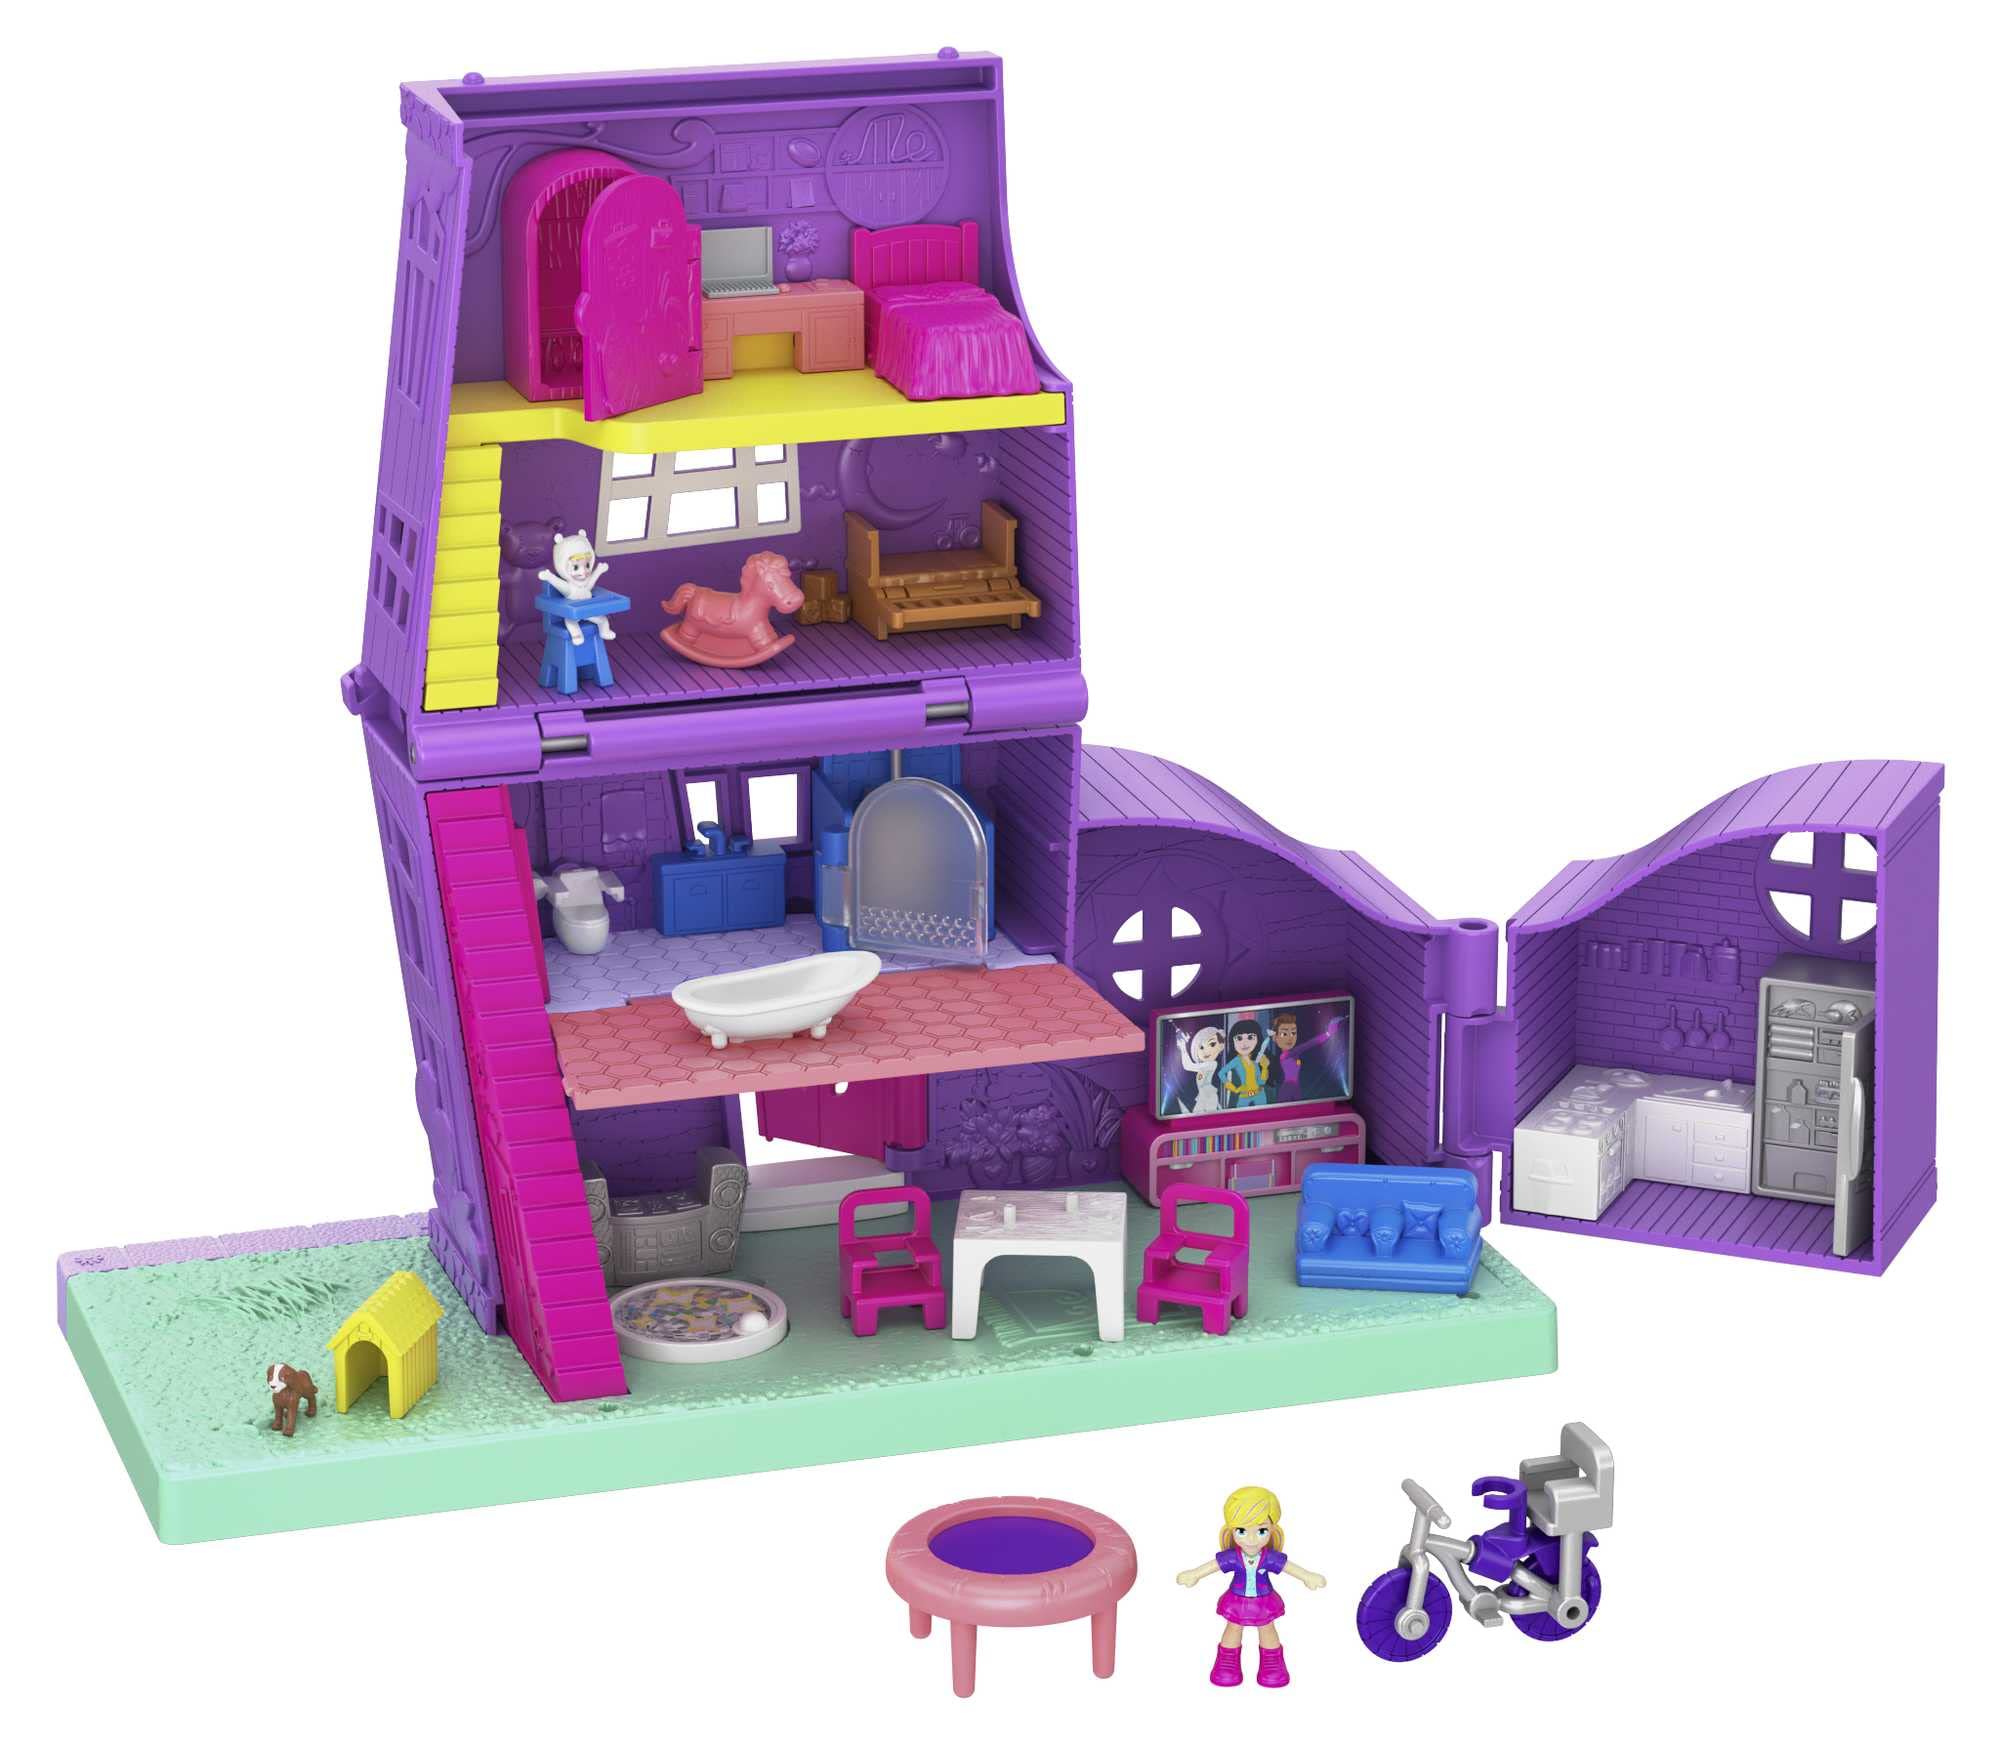 4-Story Polly Pocket Pollyville Pocket House Playset w/ Accessories and 3 Micro Figures $11.14 + Free Shipping w/ Prime or on $25+